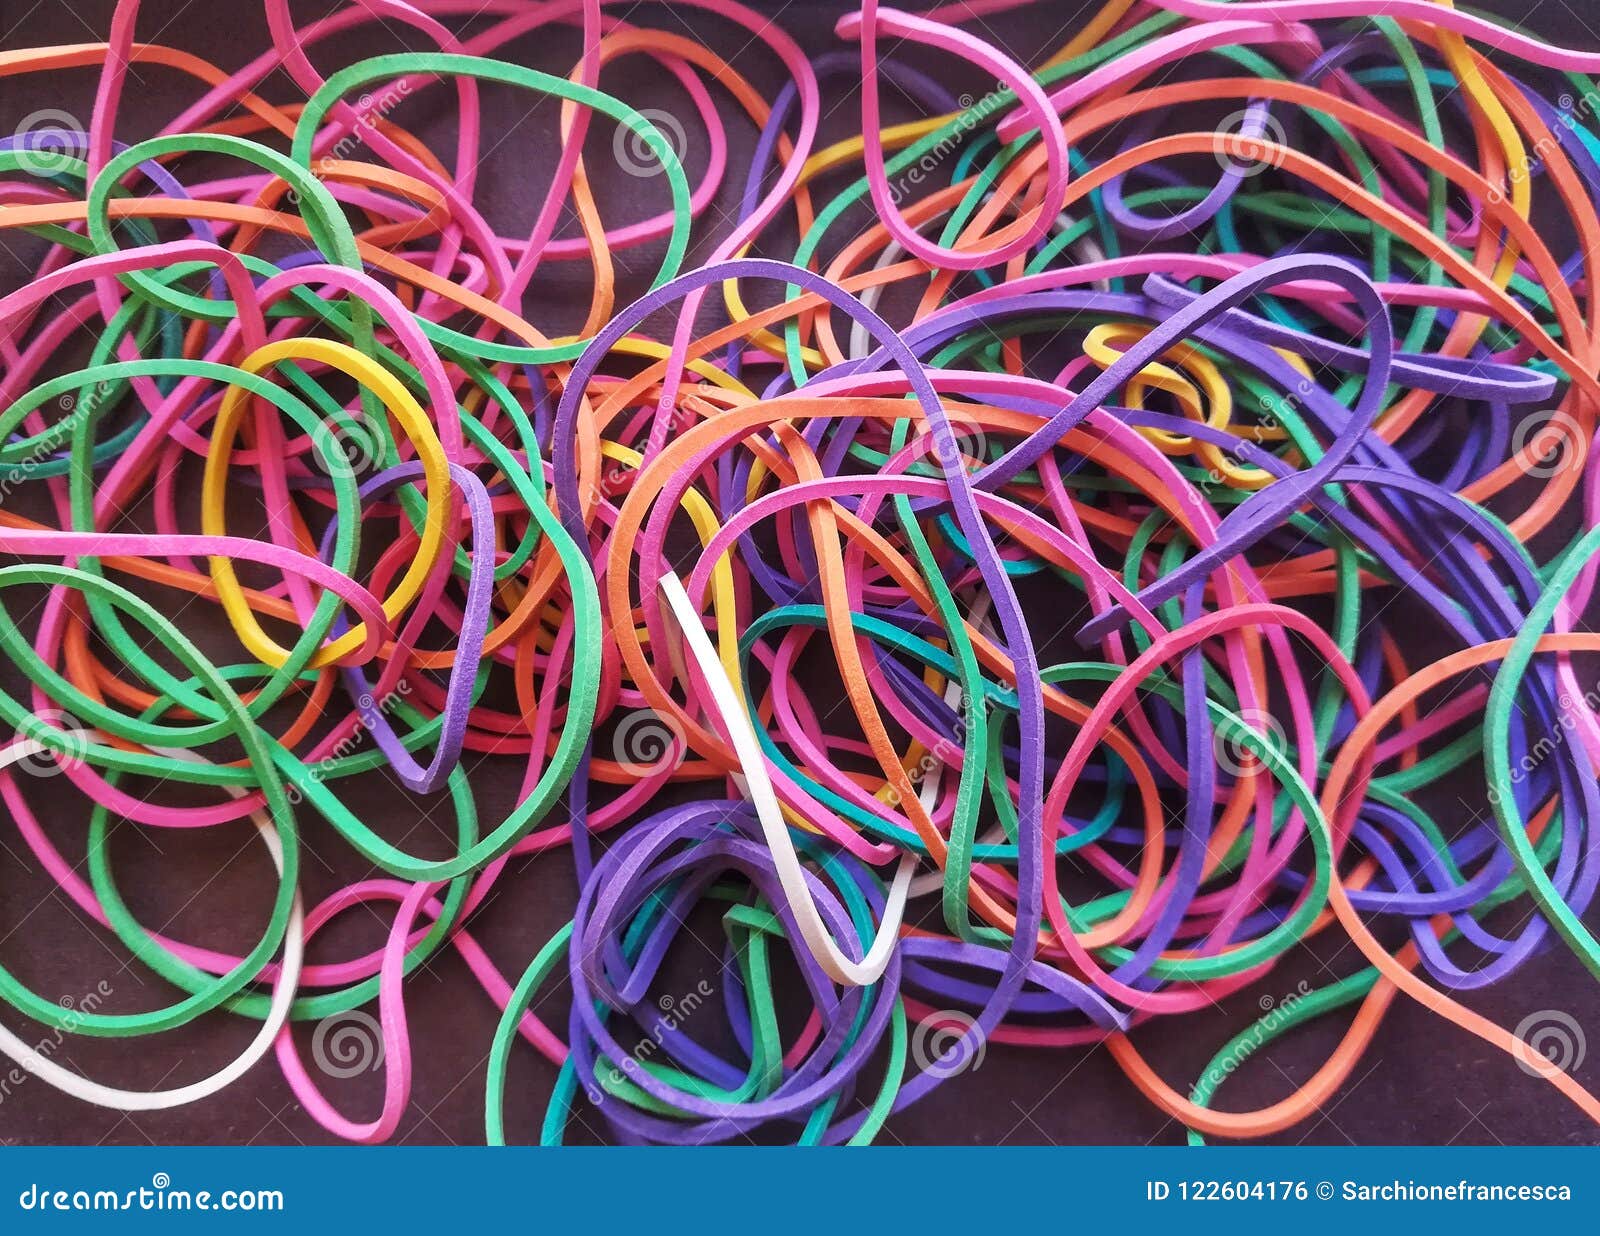 The colored rubber bands stock photo. Image of texture - 122604176